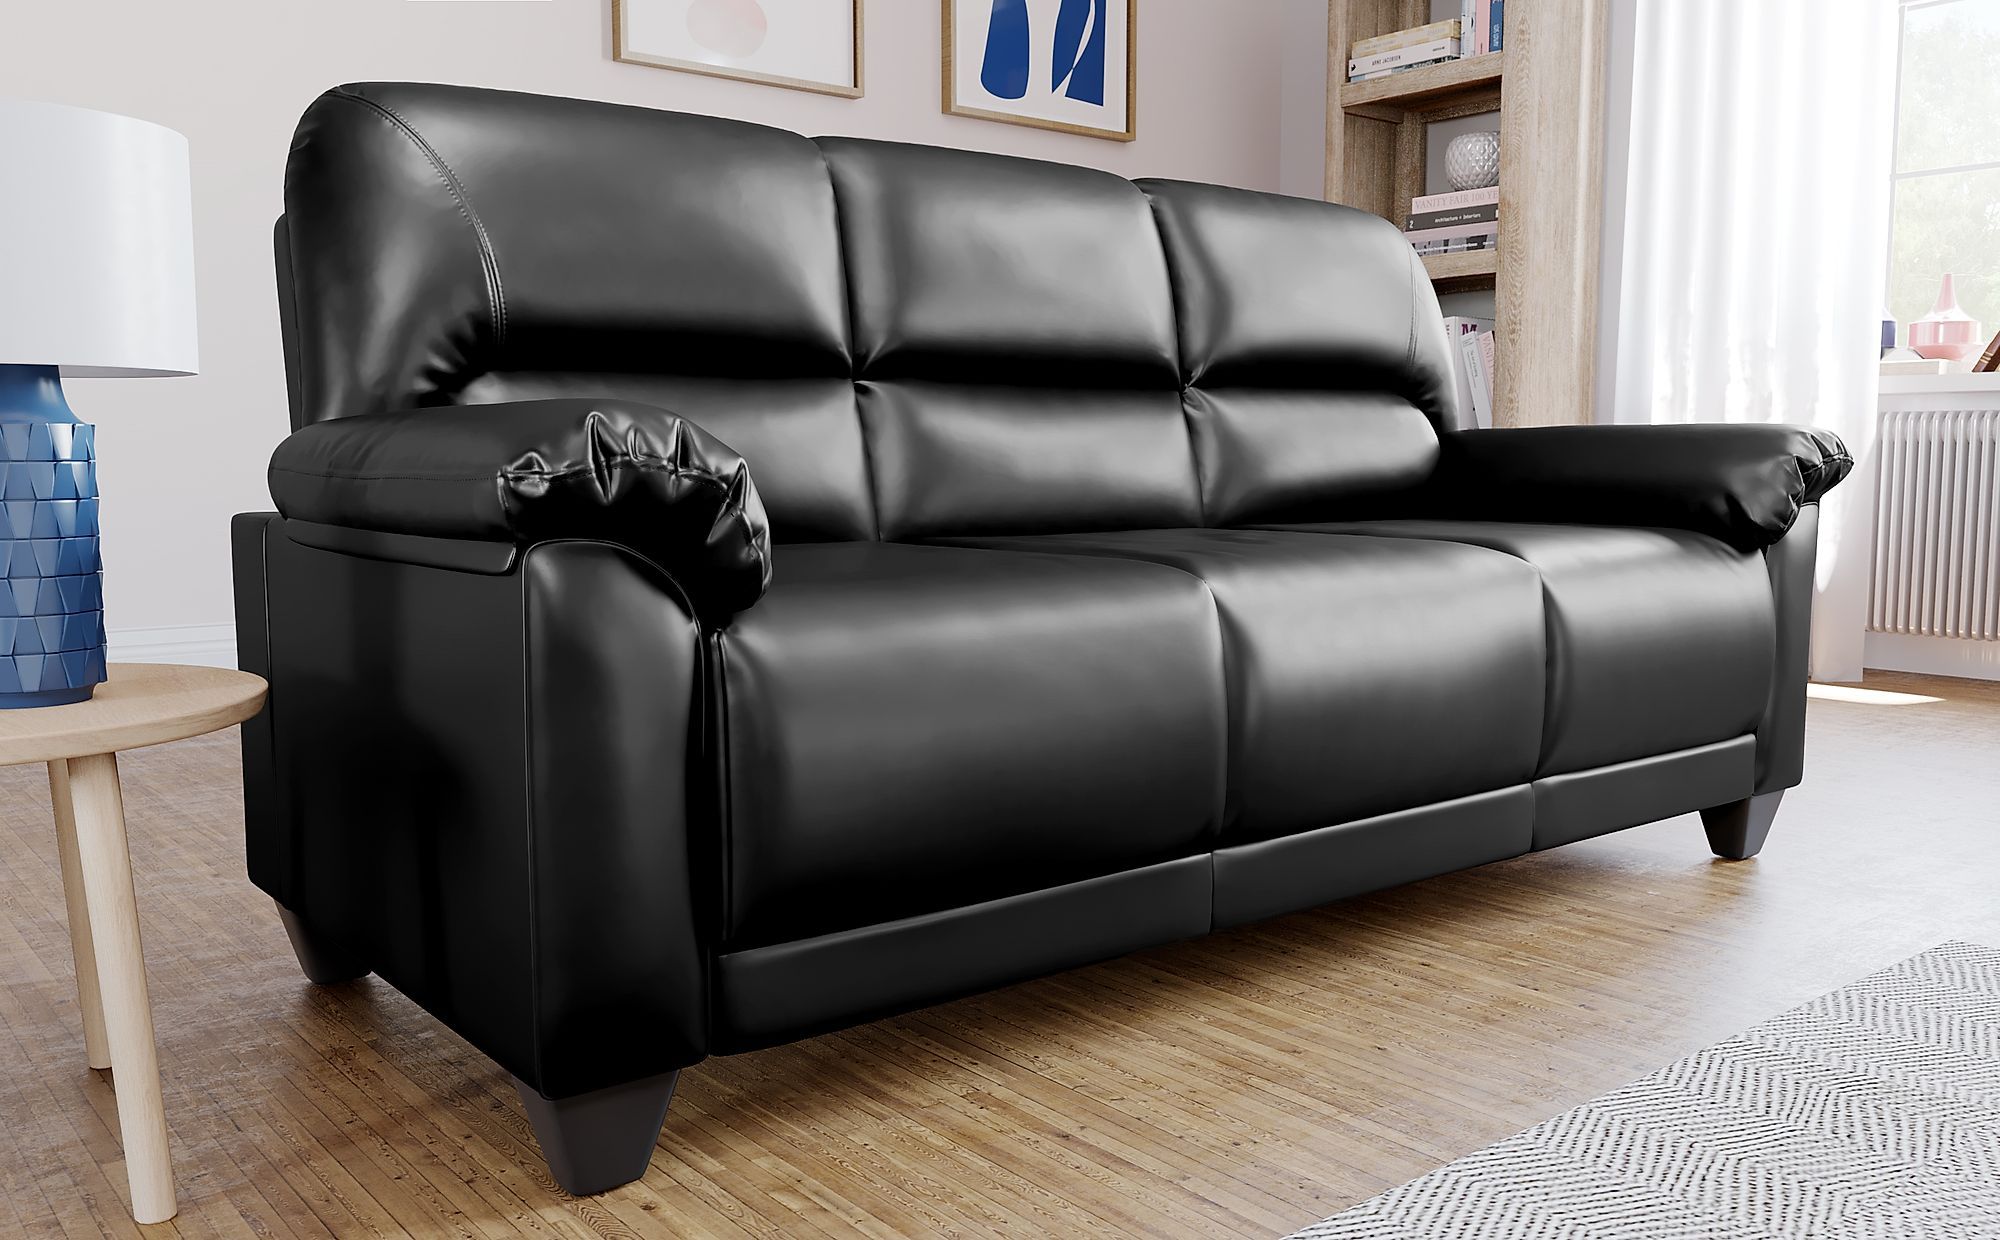 Kenton Small Black Leather 3 Seater Sofa | Furniture Choice Pertaining To 3 Seat L Shaped Sofas In Black (Gallery 18 of 20)